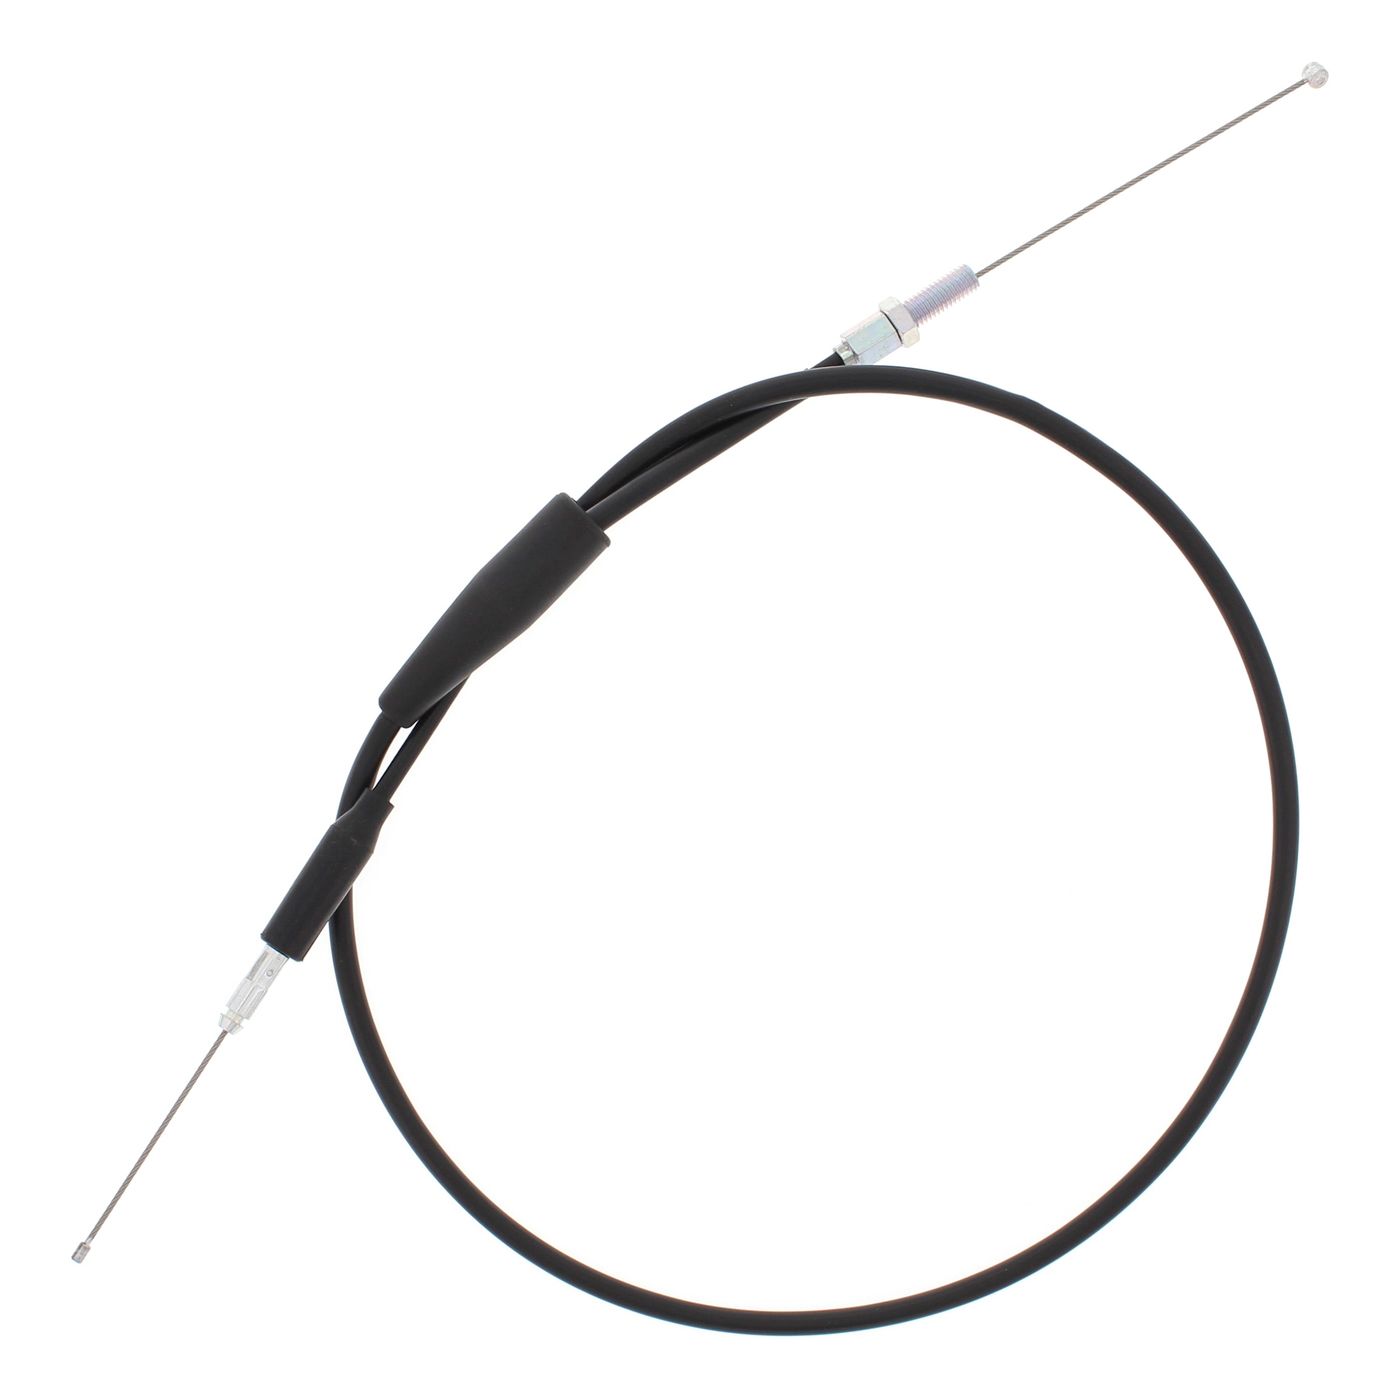 Wrp Throttle Cables - WRP451035 image